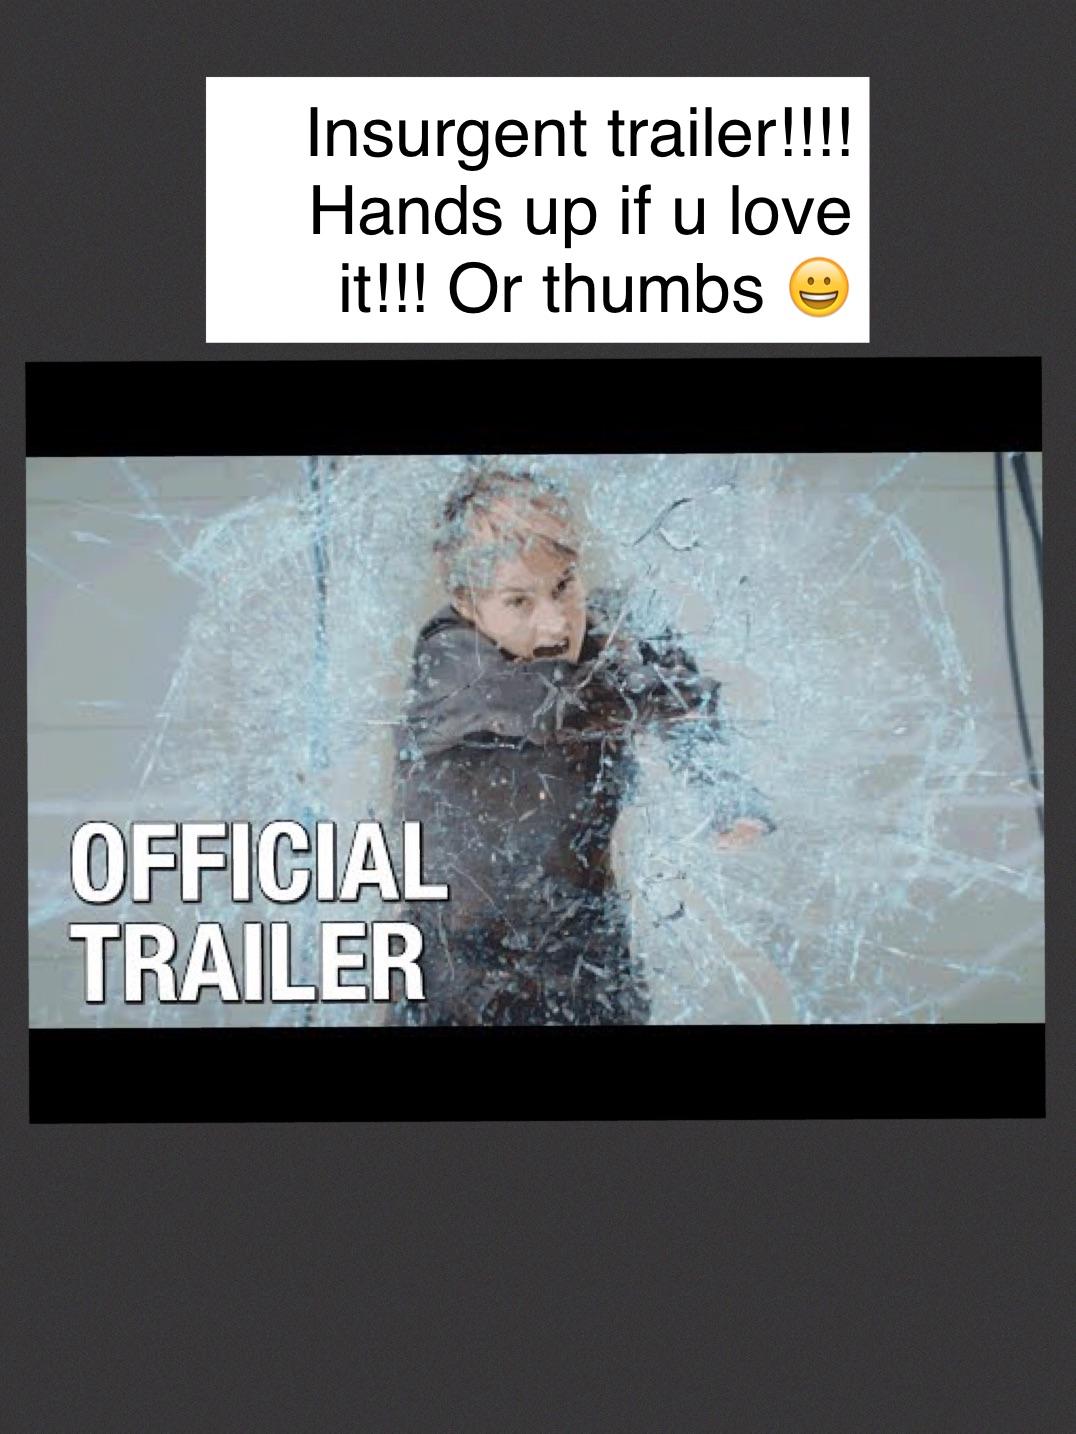 Insurgent trailer!!!! Hands up if u love it!!! Or thumbs 😀